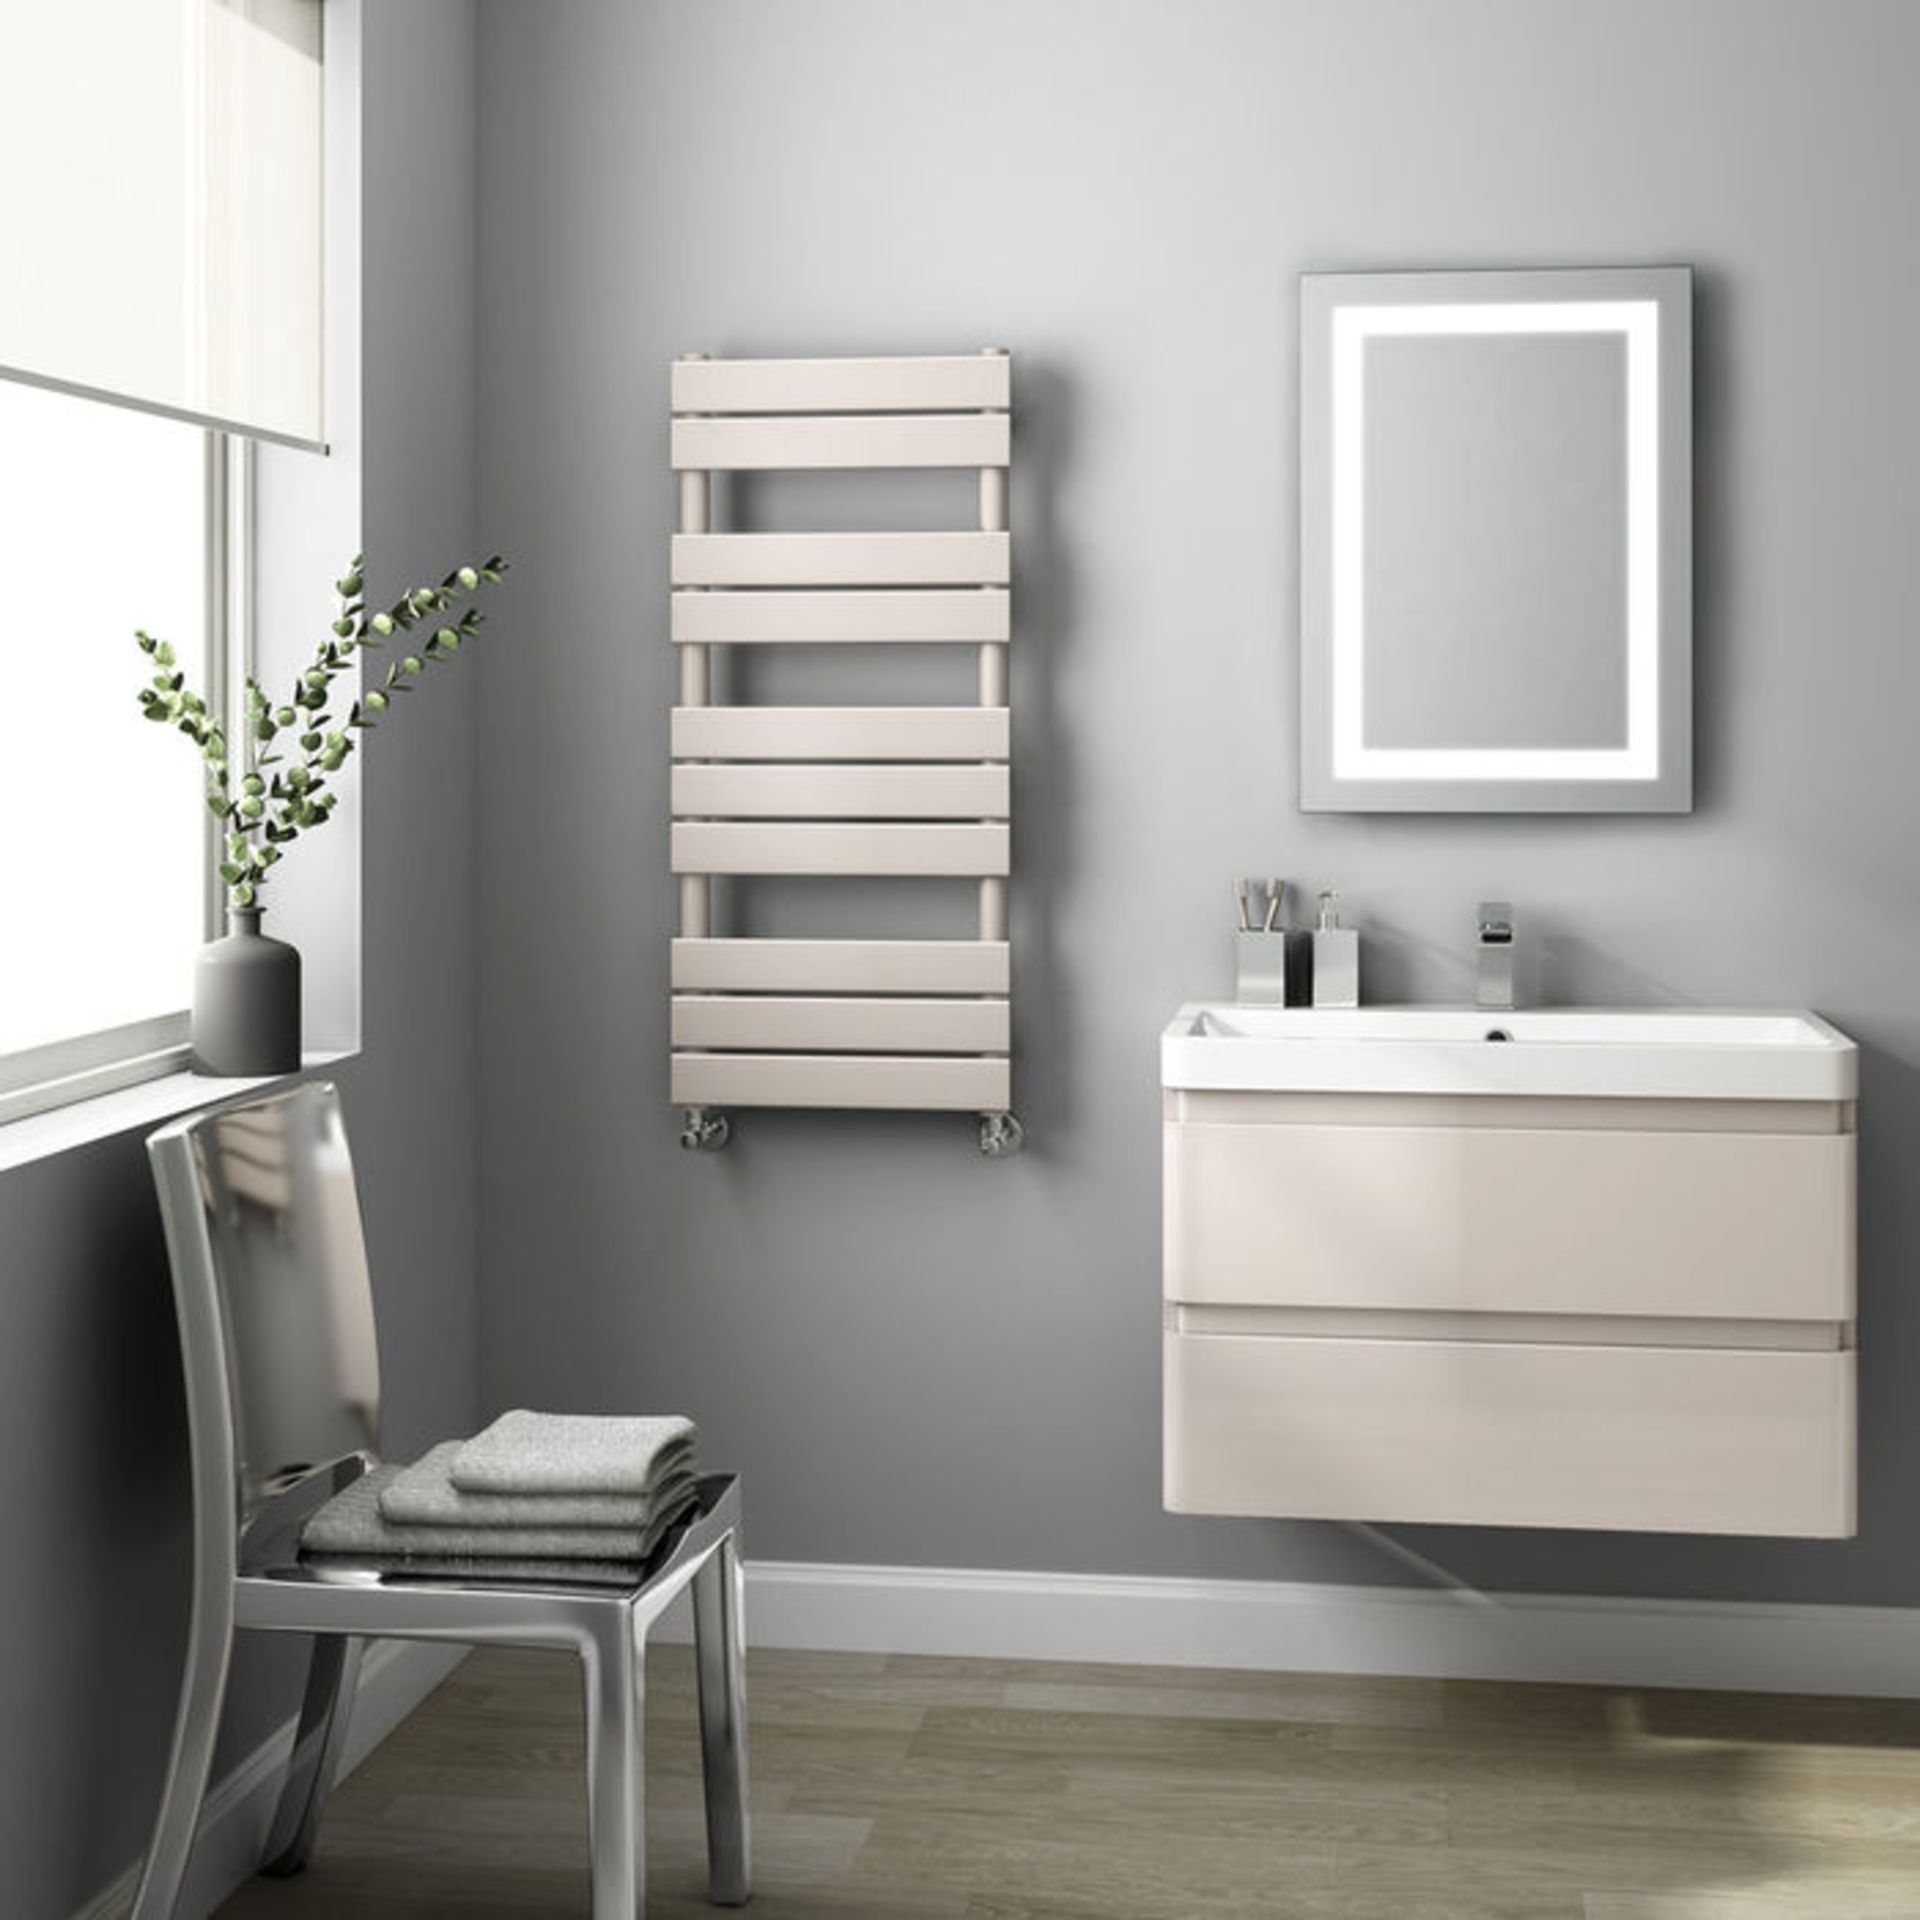 (W11) 1000x450mm Latte Flat Panel Ladder Towel Radiator. Made from high quality low carbon steel - Image 2 of 3